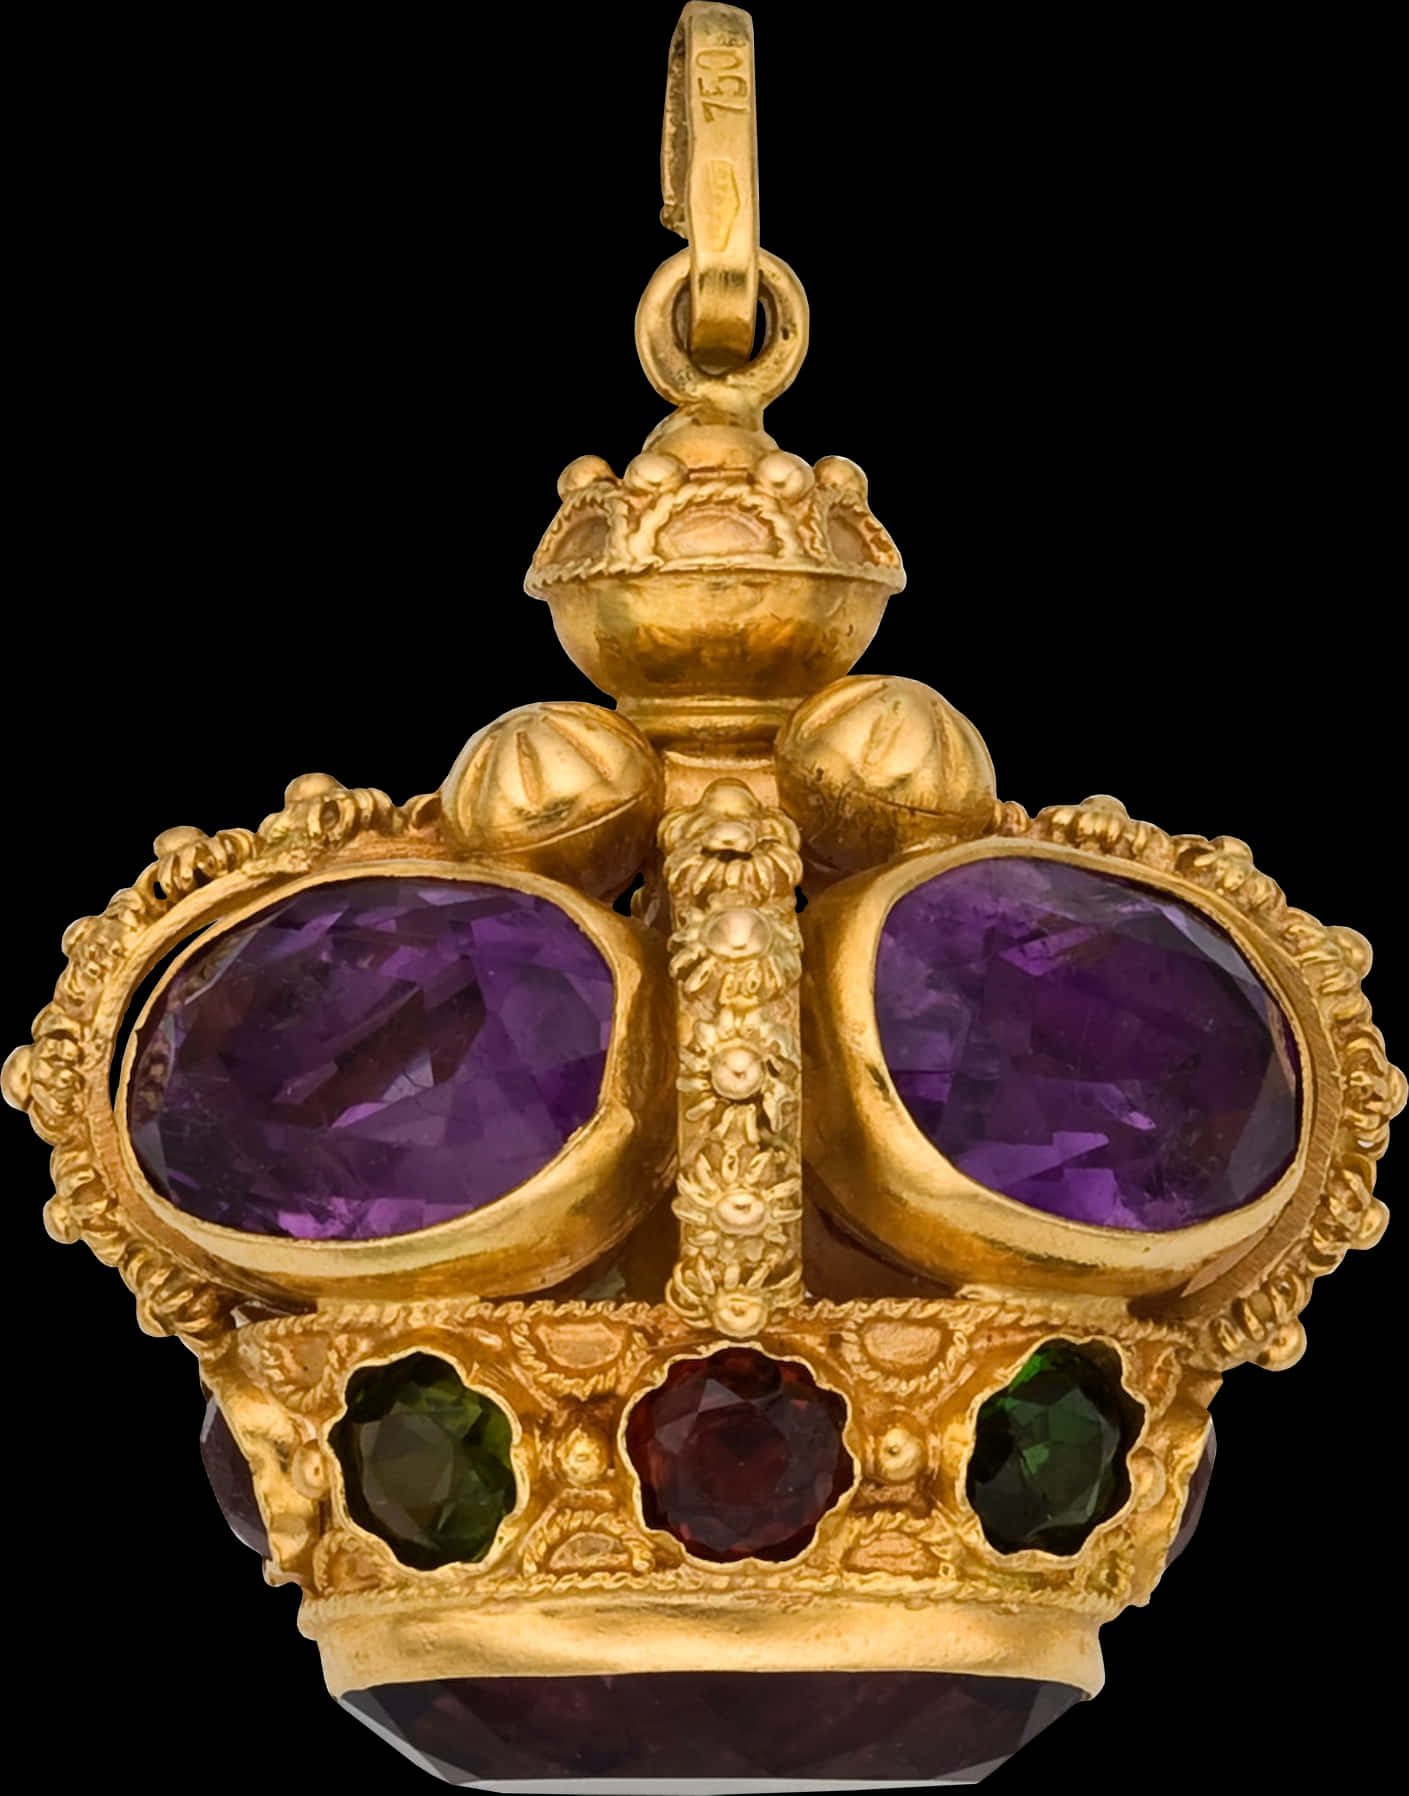 A Gold Crown With Purple And Green Gems